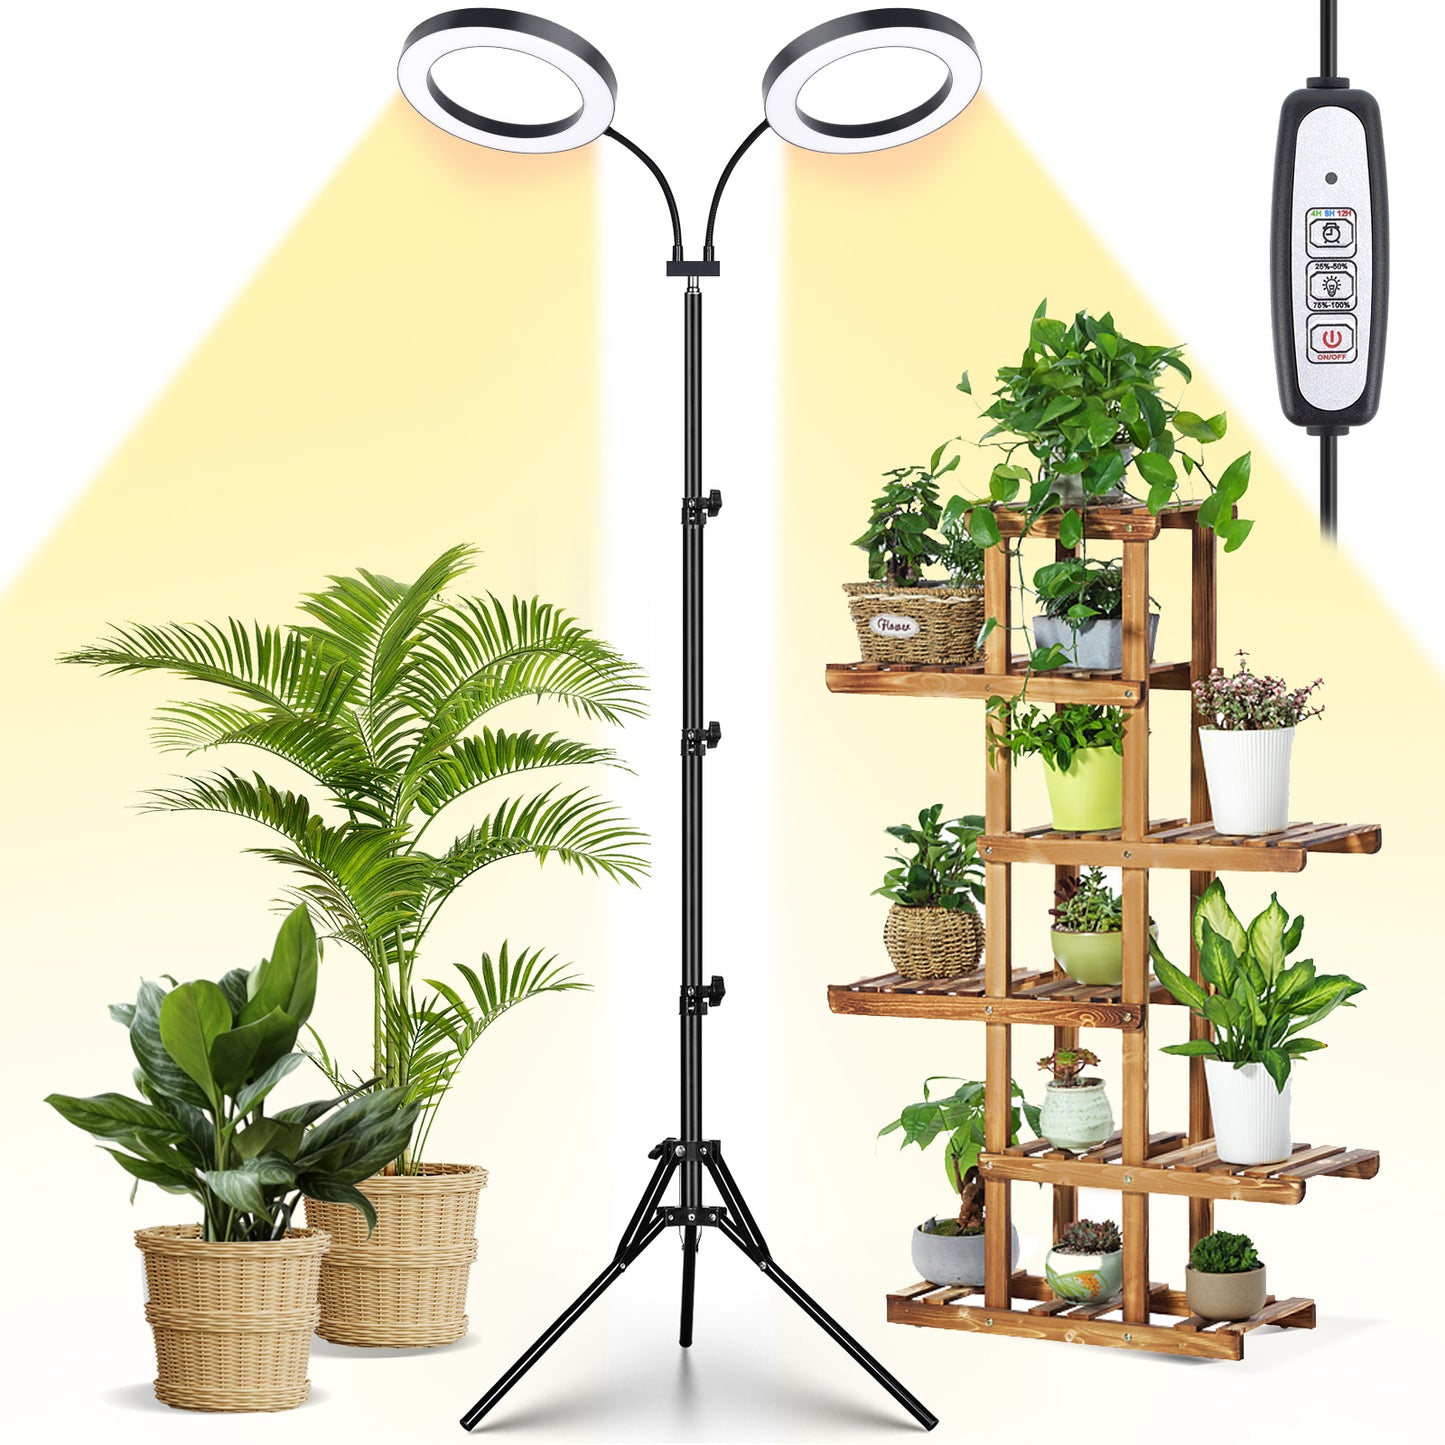 FOXGARDEN 6.3'' Diameter Halo Plant Light with Stand Dual-head